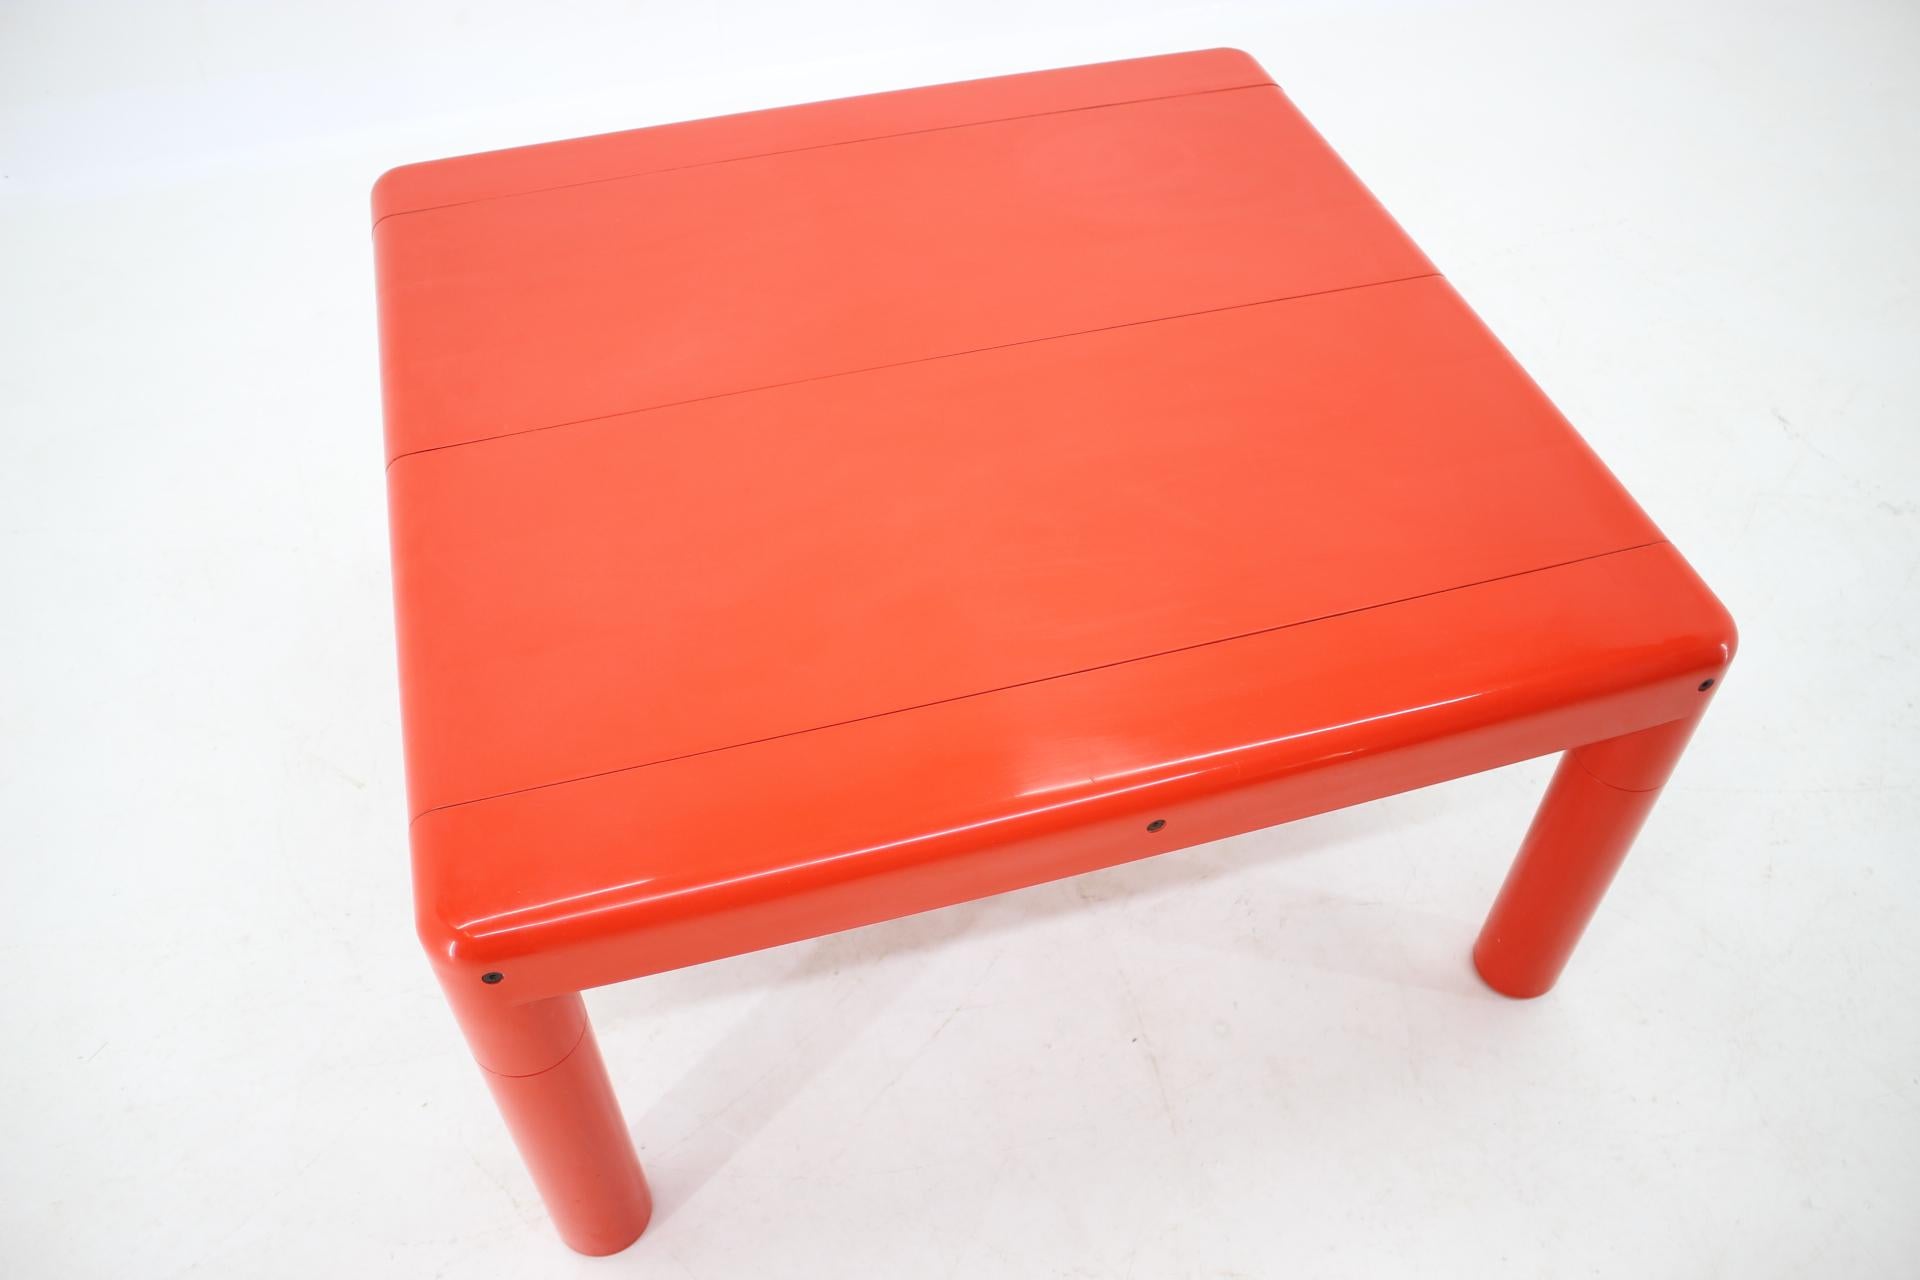 Late 20th Century Midcentury Space Age Coffee Table UPO, Eero Aarnio, Finland, 1970s For Sale